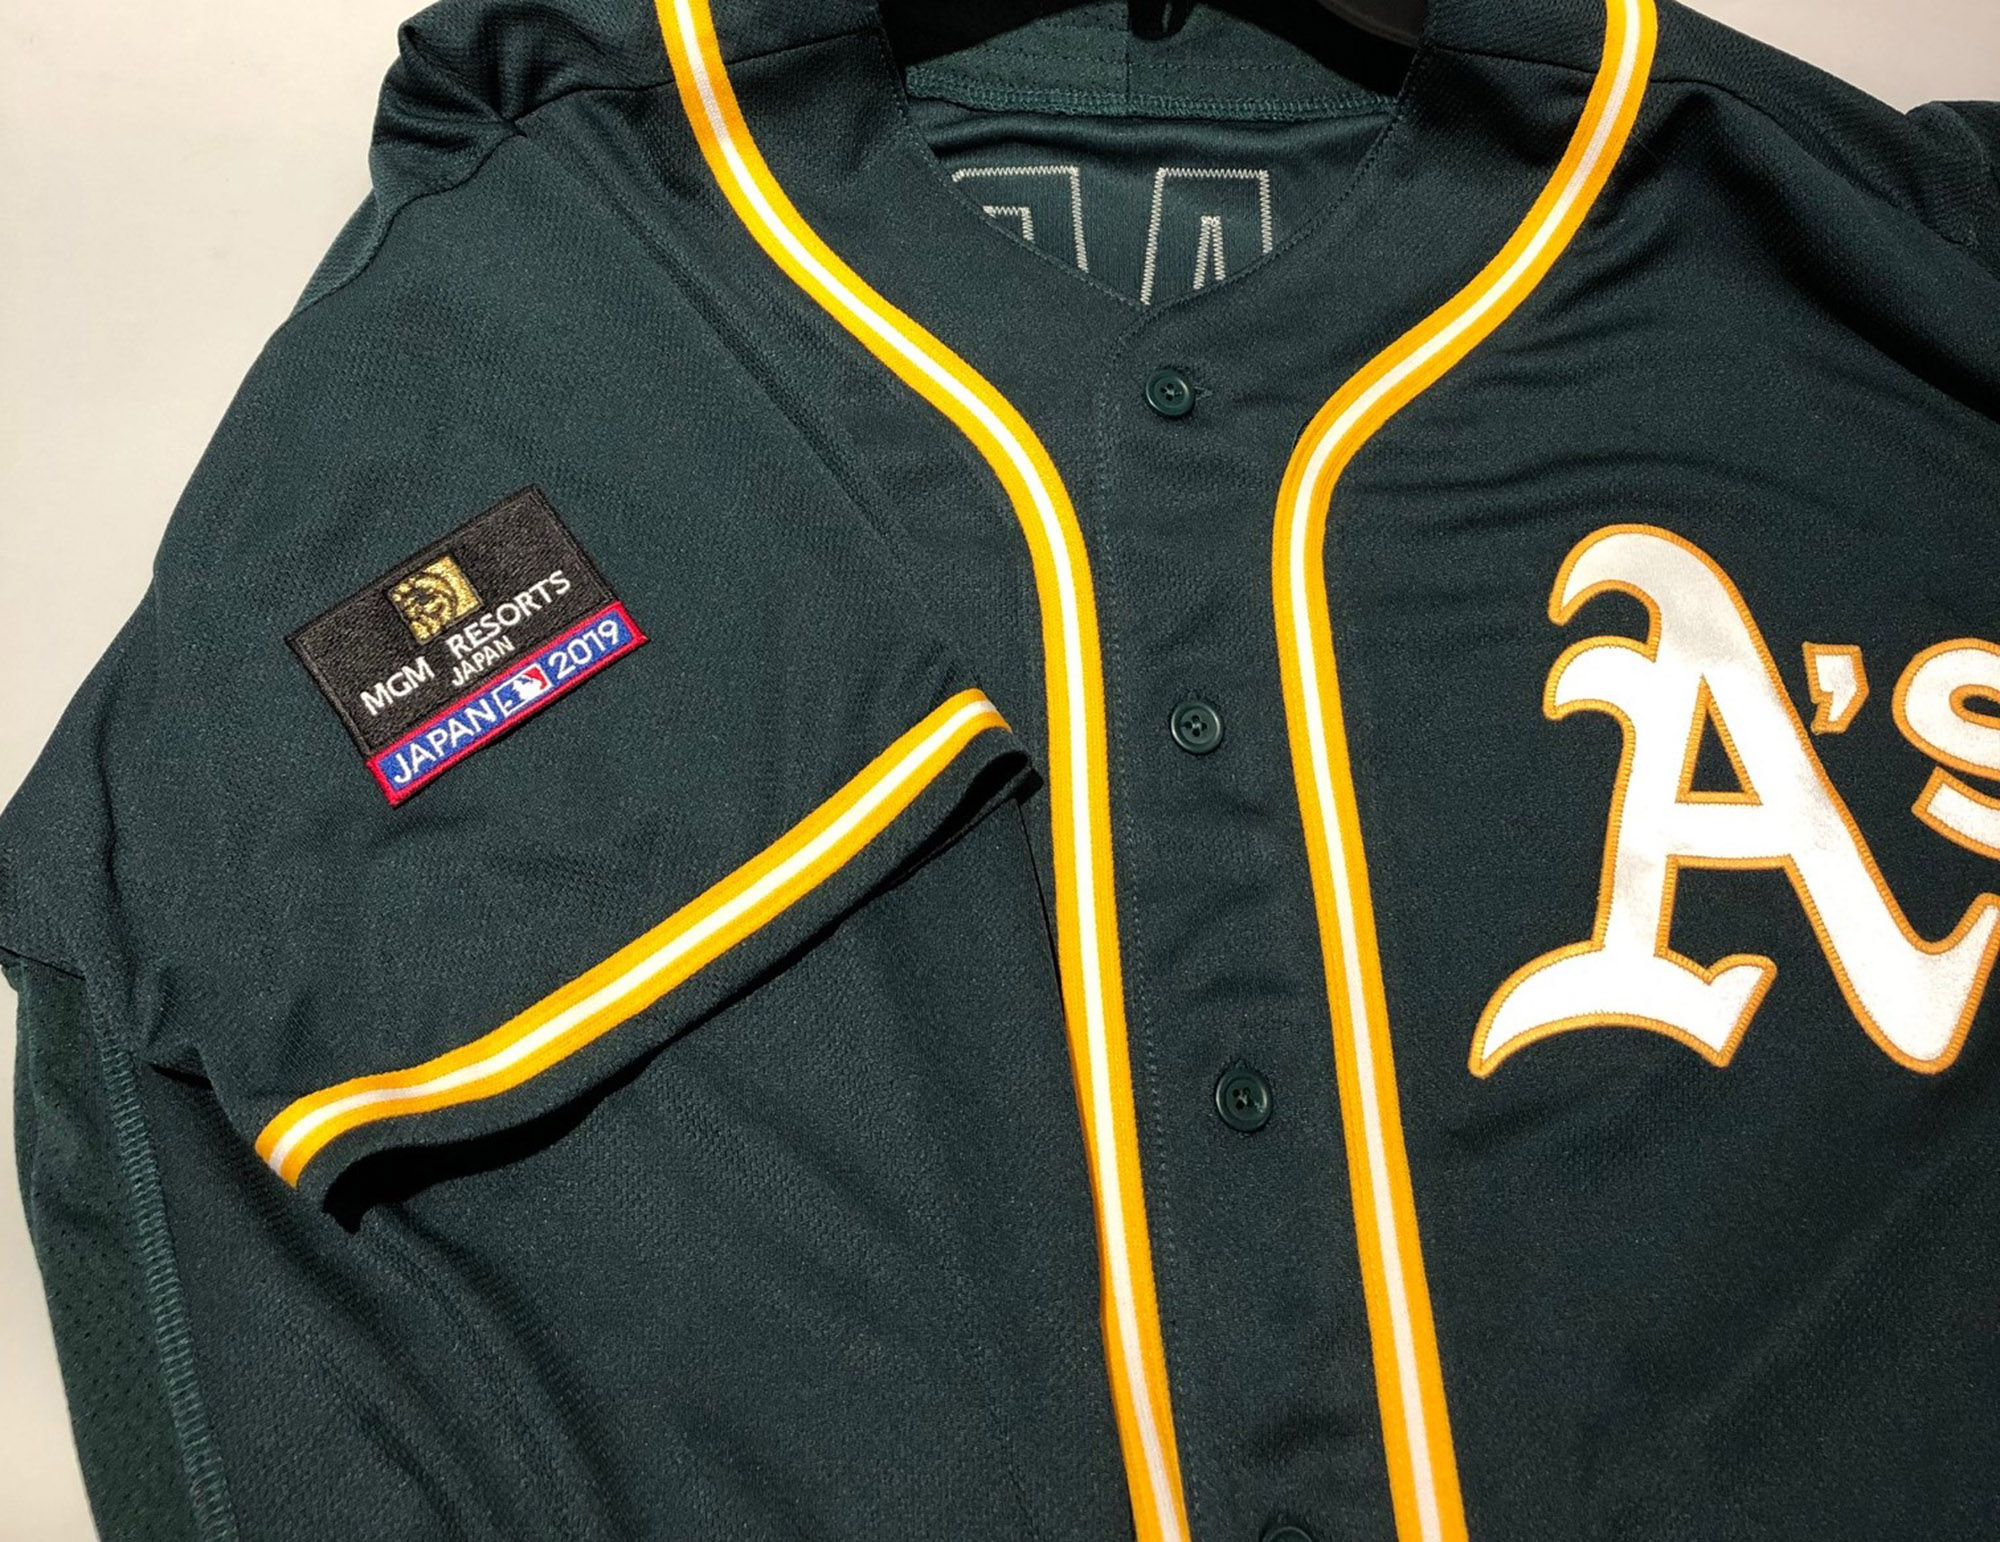 Batter Up, Brands: MLB Jersey Patch Deals are Changing the Game for  Sponsors - SponsorUnited